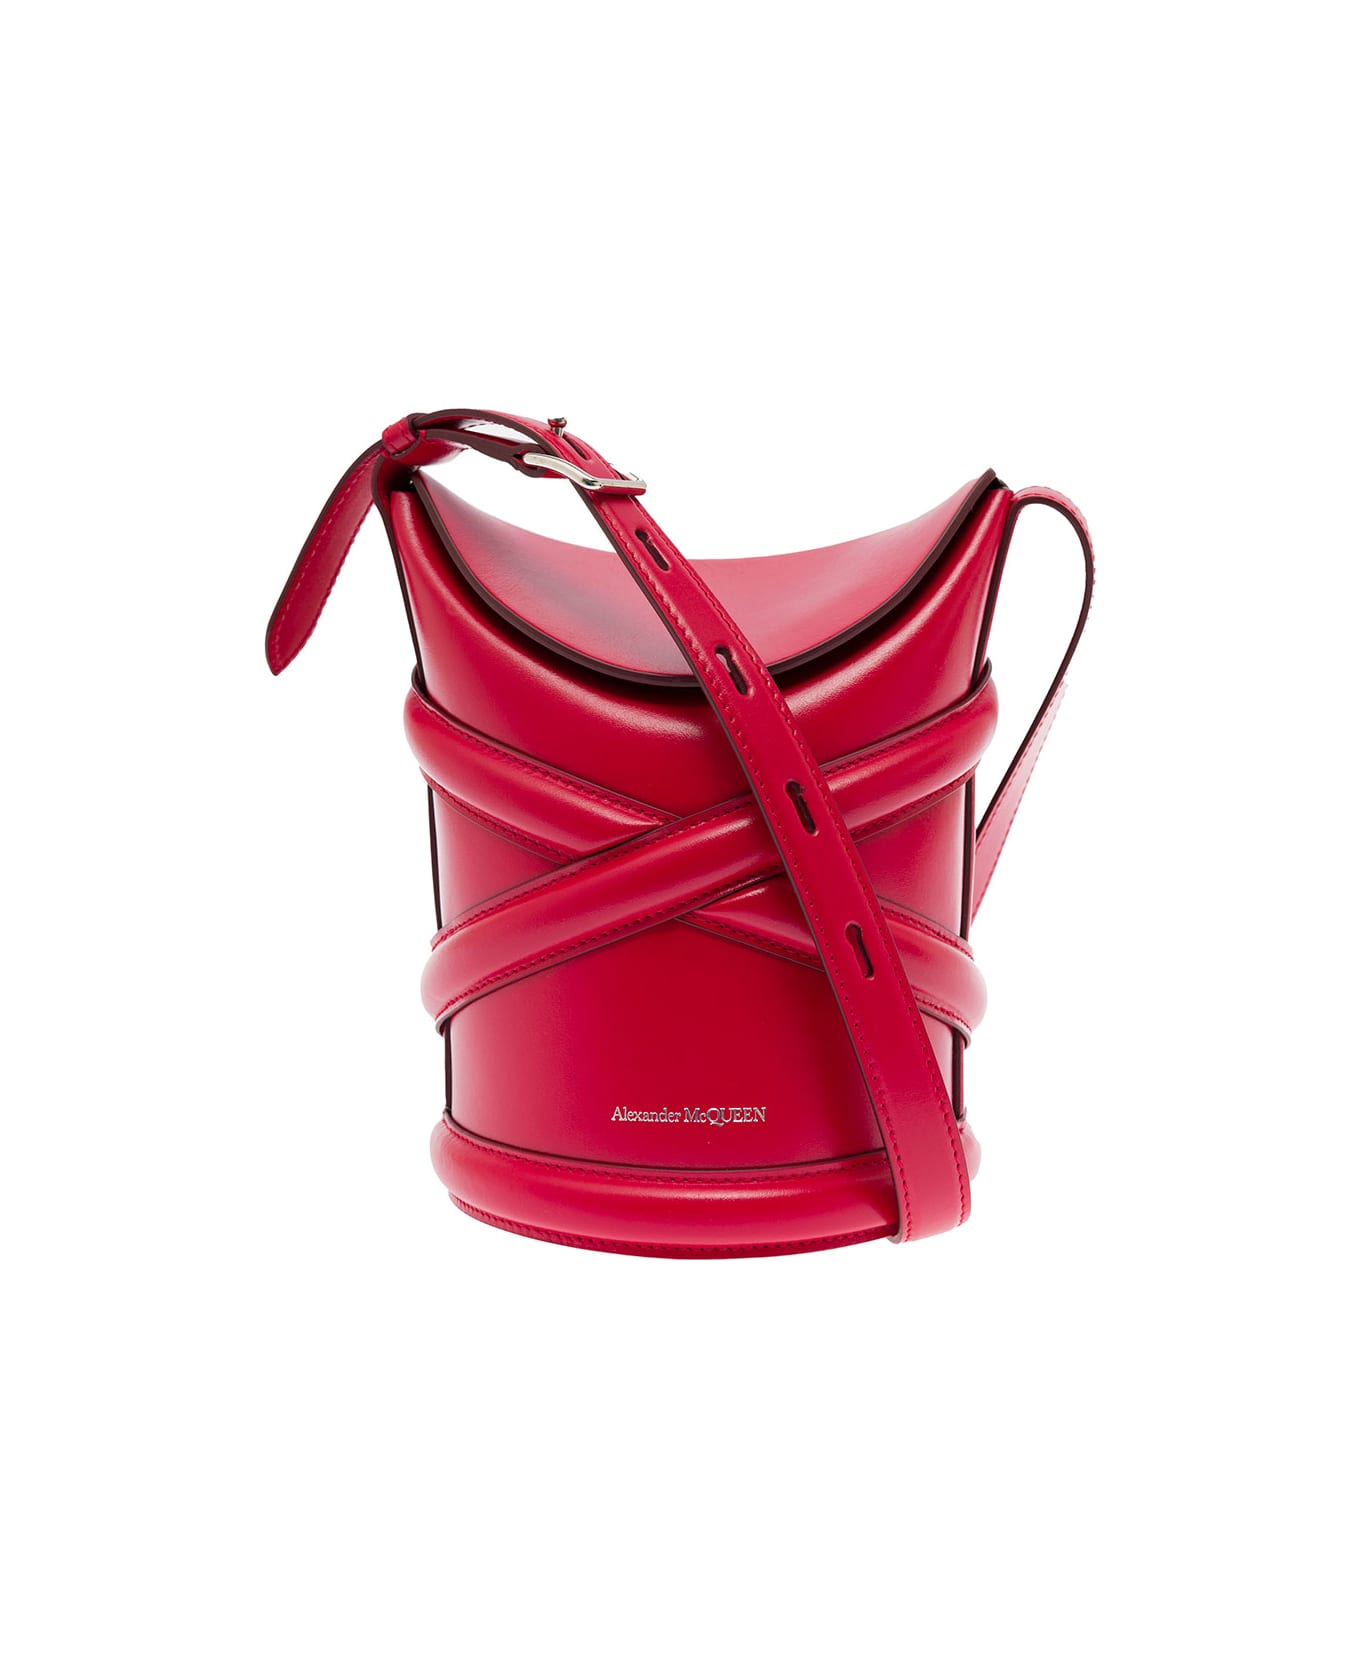 Alexander McQueen Woman's The Curve Small Red Leather Crossbody Bag - Rosso